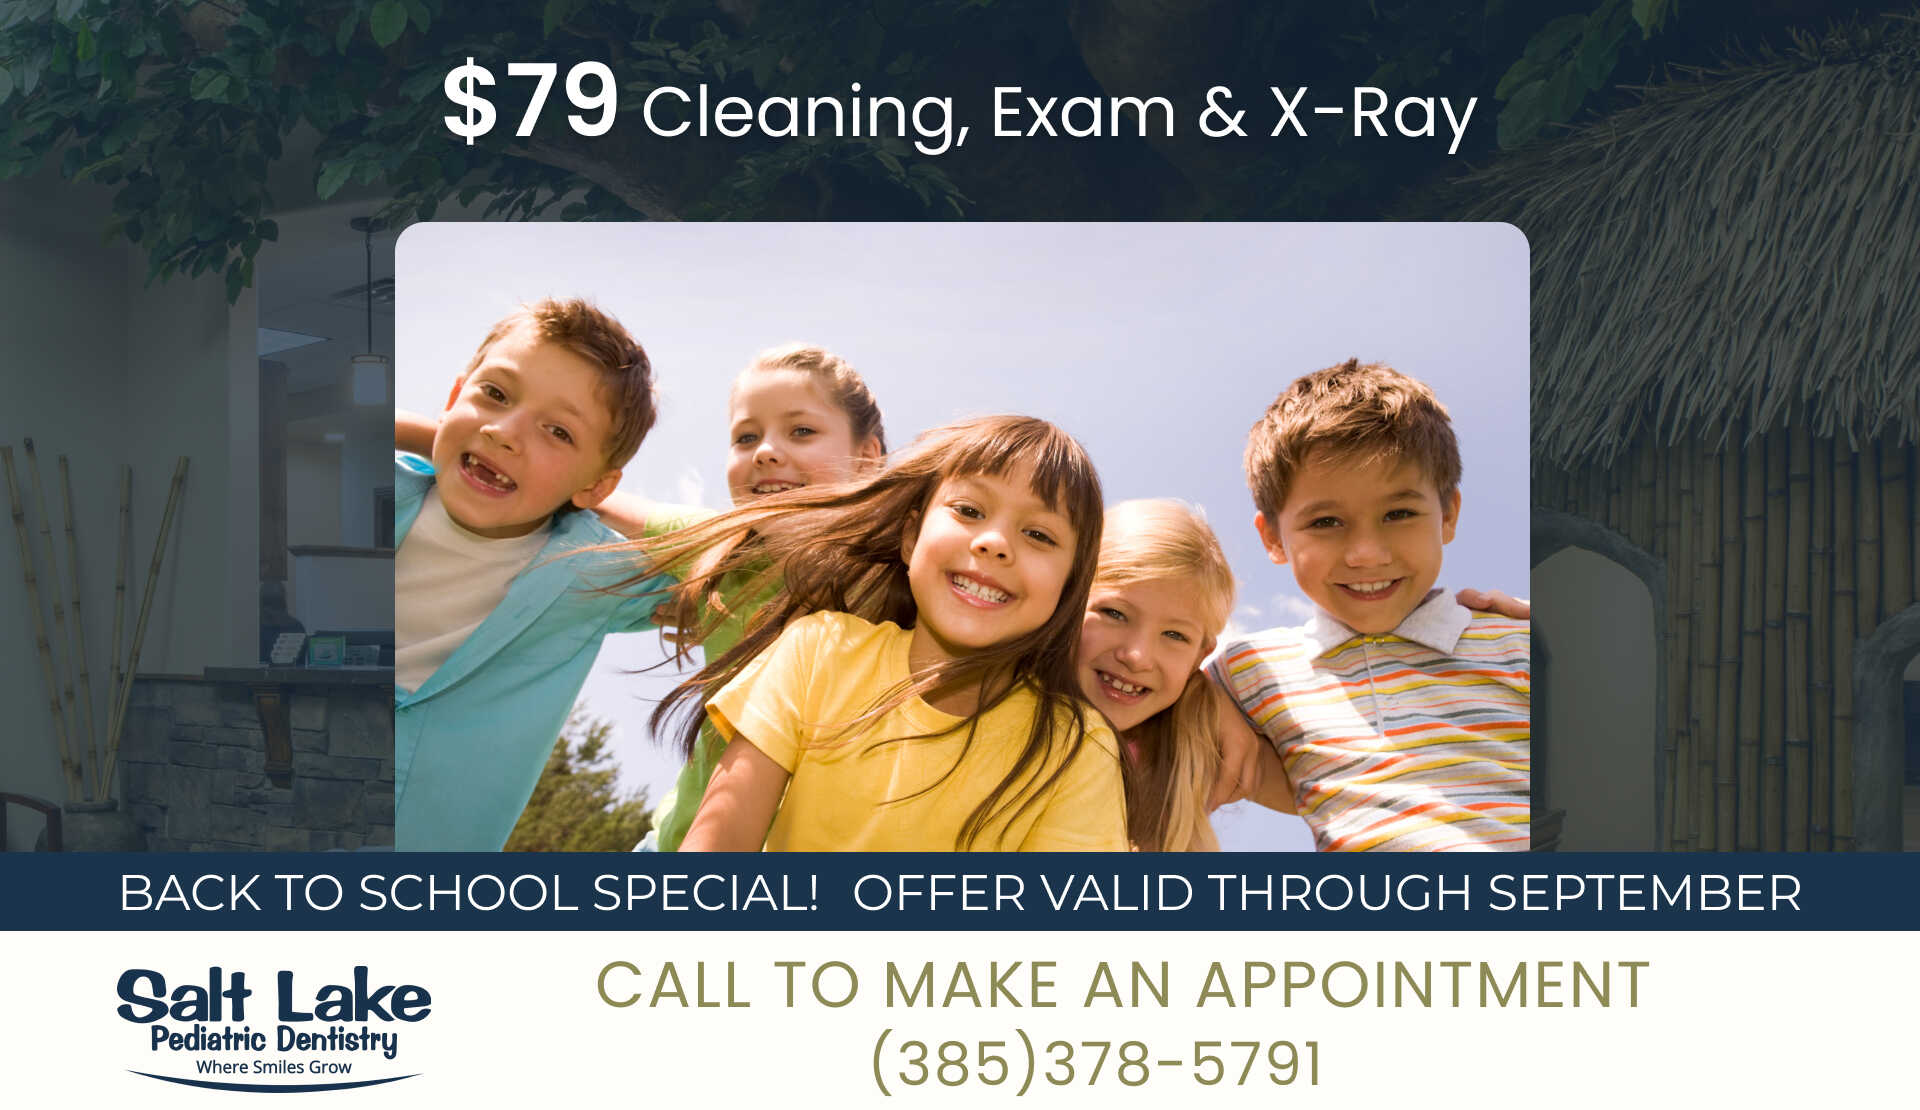 $79 Cleaning, Exam & X-Ray